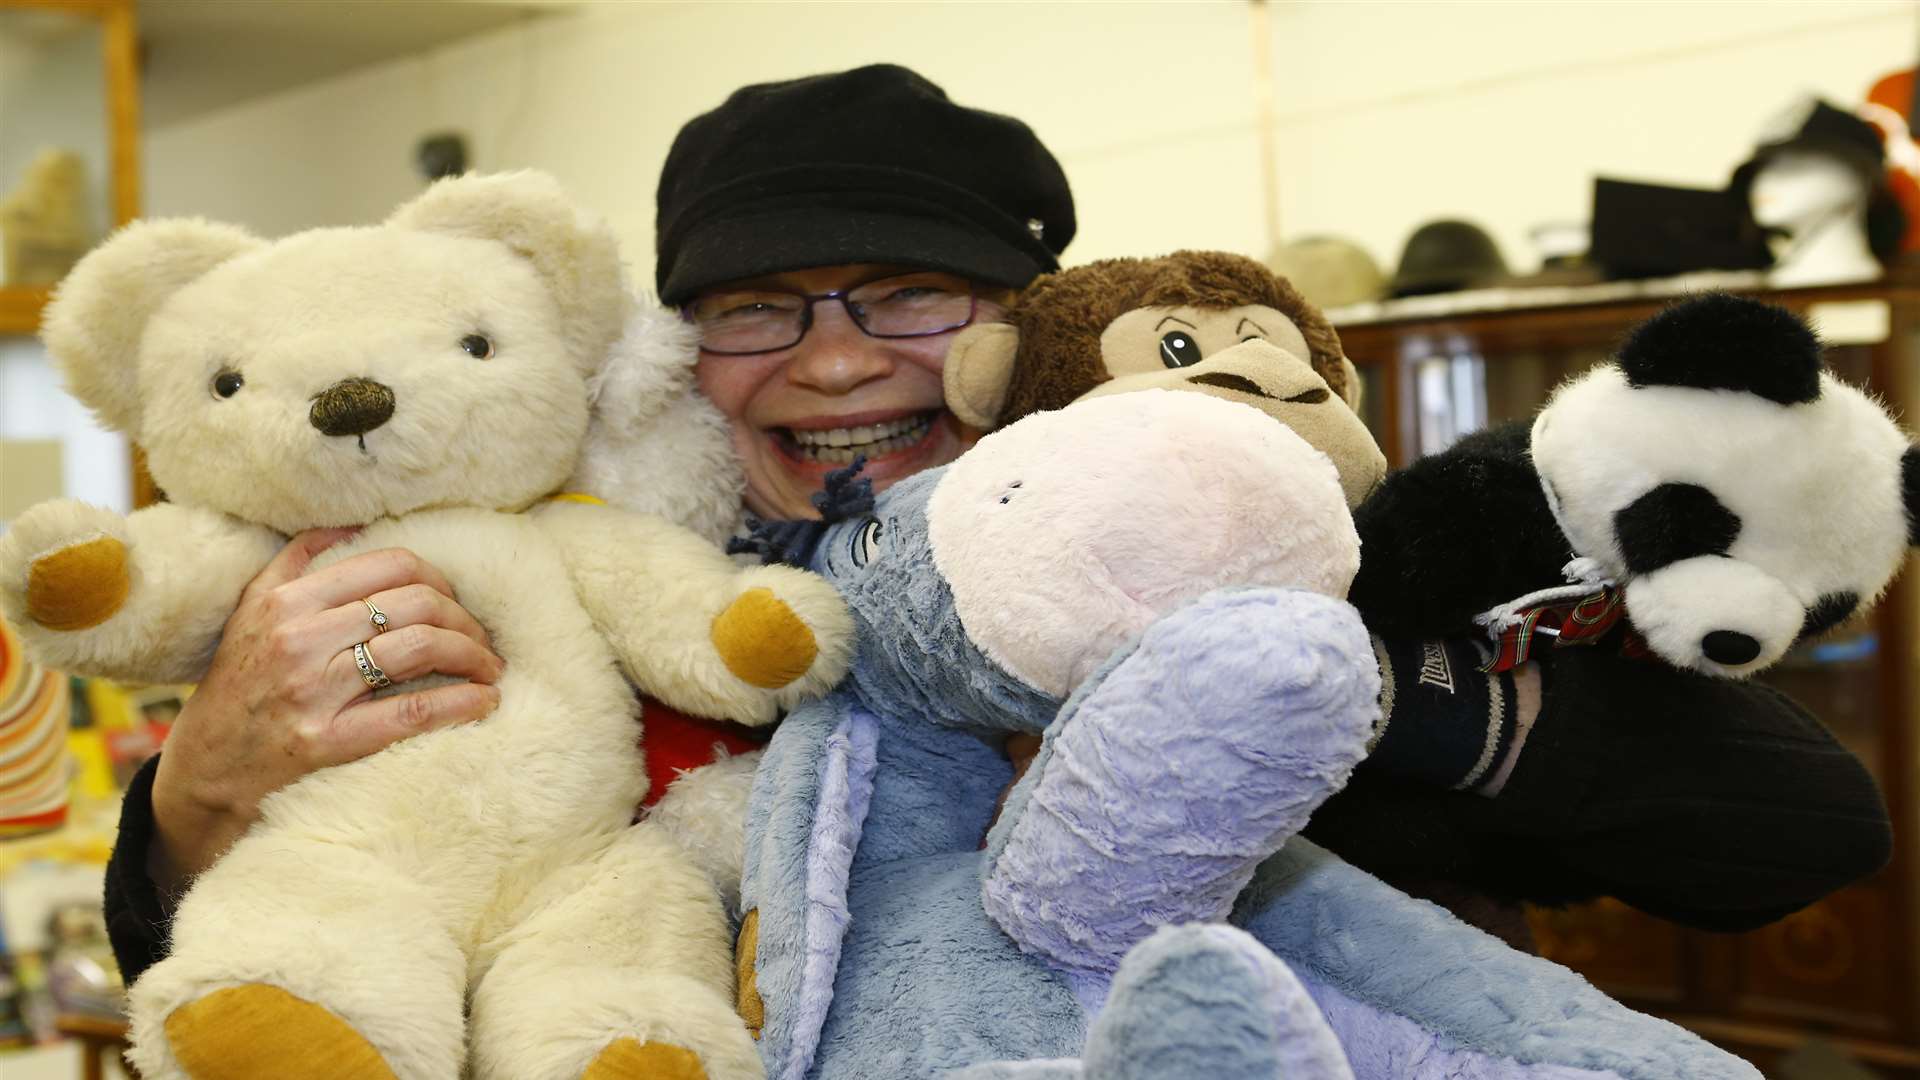 Jane Maltwood has moved her Teddy Bear Hospital shop from Broadstairs to Cliftonville